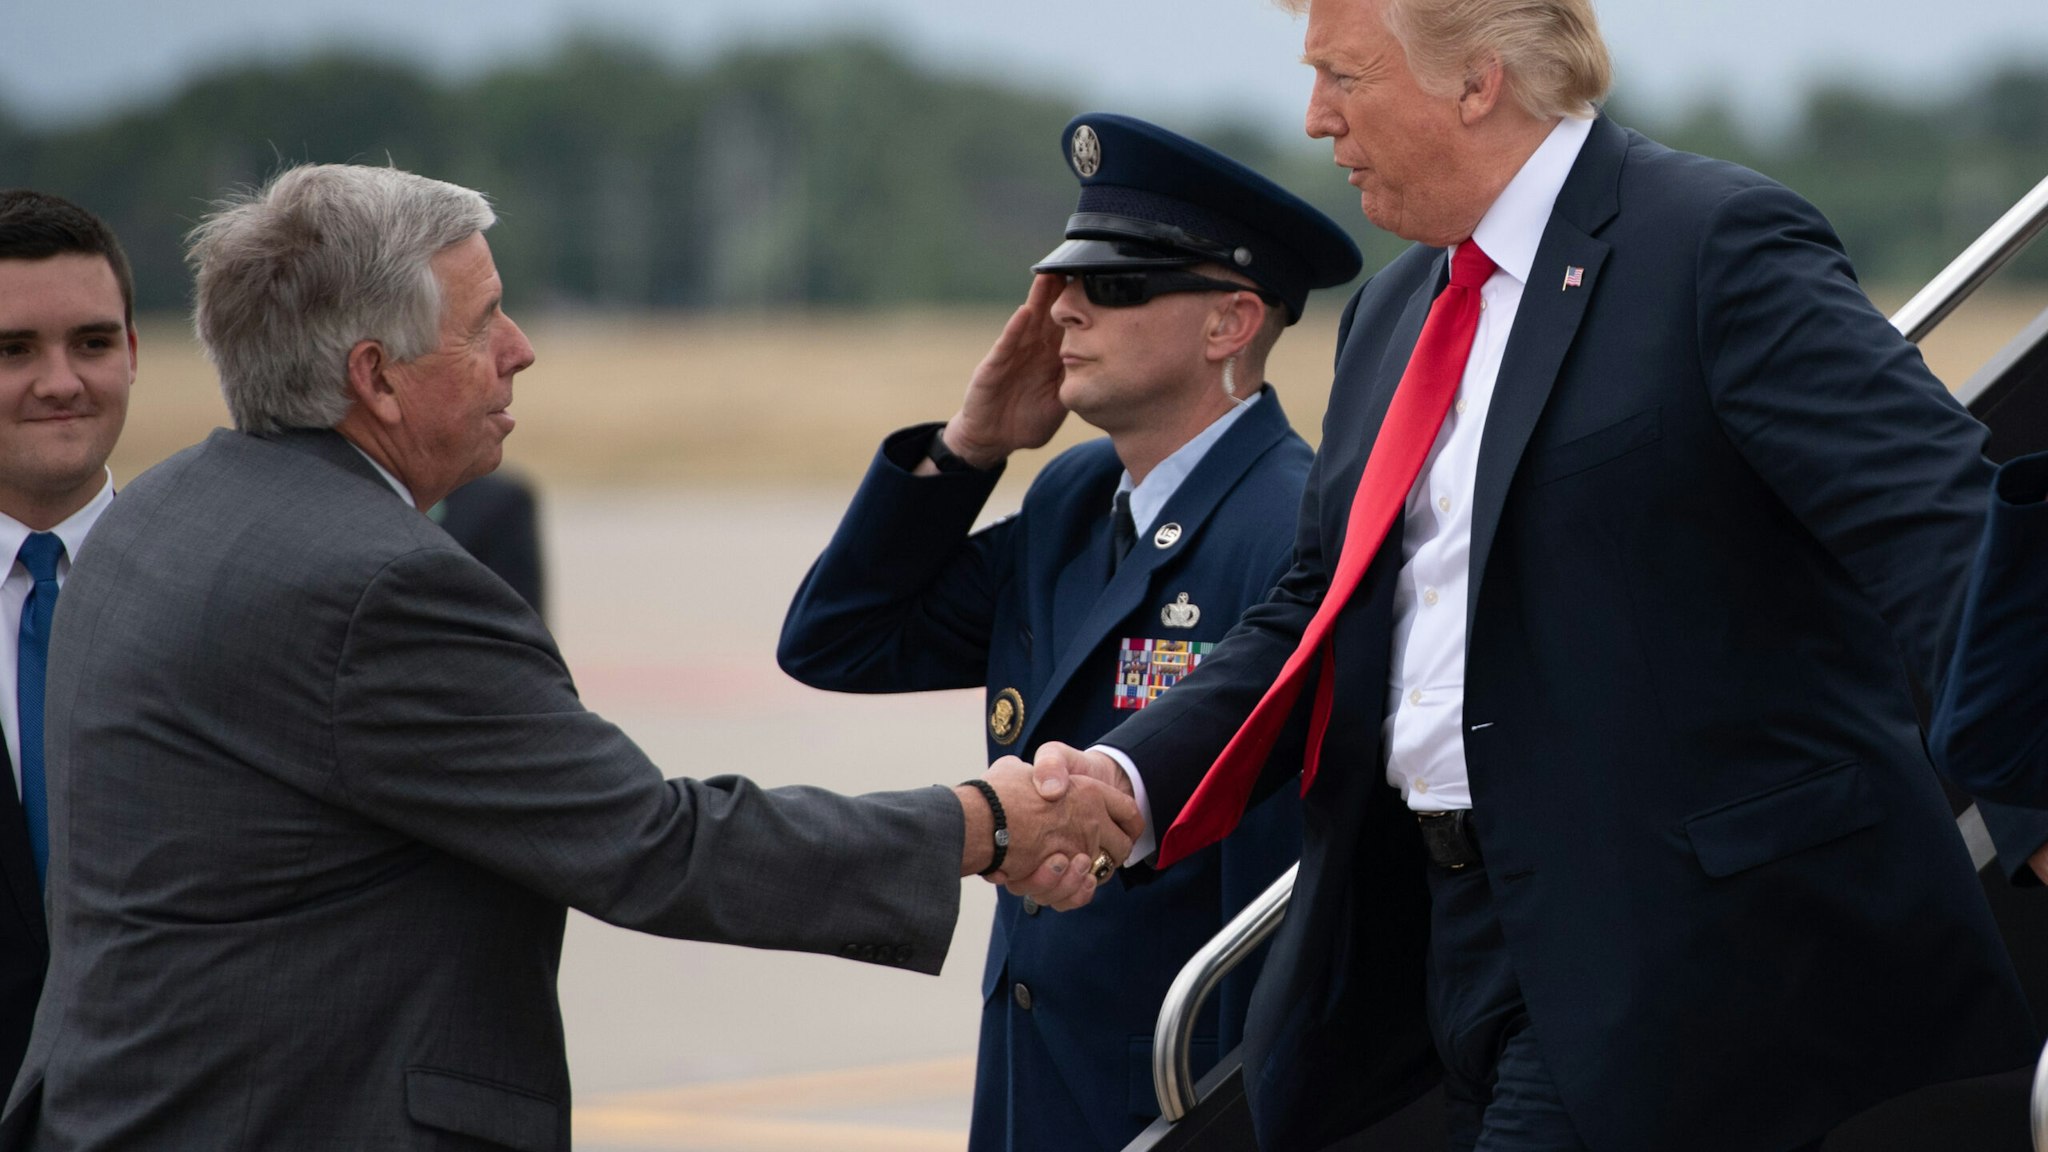 US President Donald Trump shakes hands with Missouri Governor Mike Parson (L) as he disembarks from Air Force One upon arrival at St. Louis Lambert International Airport in St. Louis, Missouri, July 26, 2018, as he travels to nearby Granite City, Illinois to speak about the economy. (Photo by SAUL LOEB / AFP) (Photo credit should read SAUL LOEB/AFP via Getty Images)